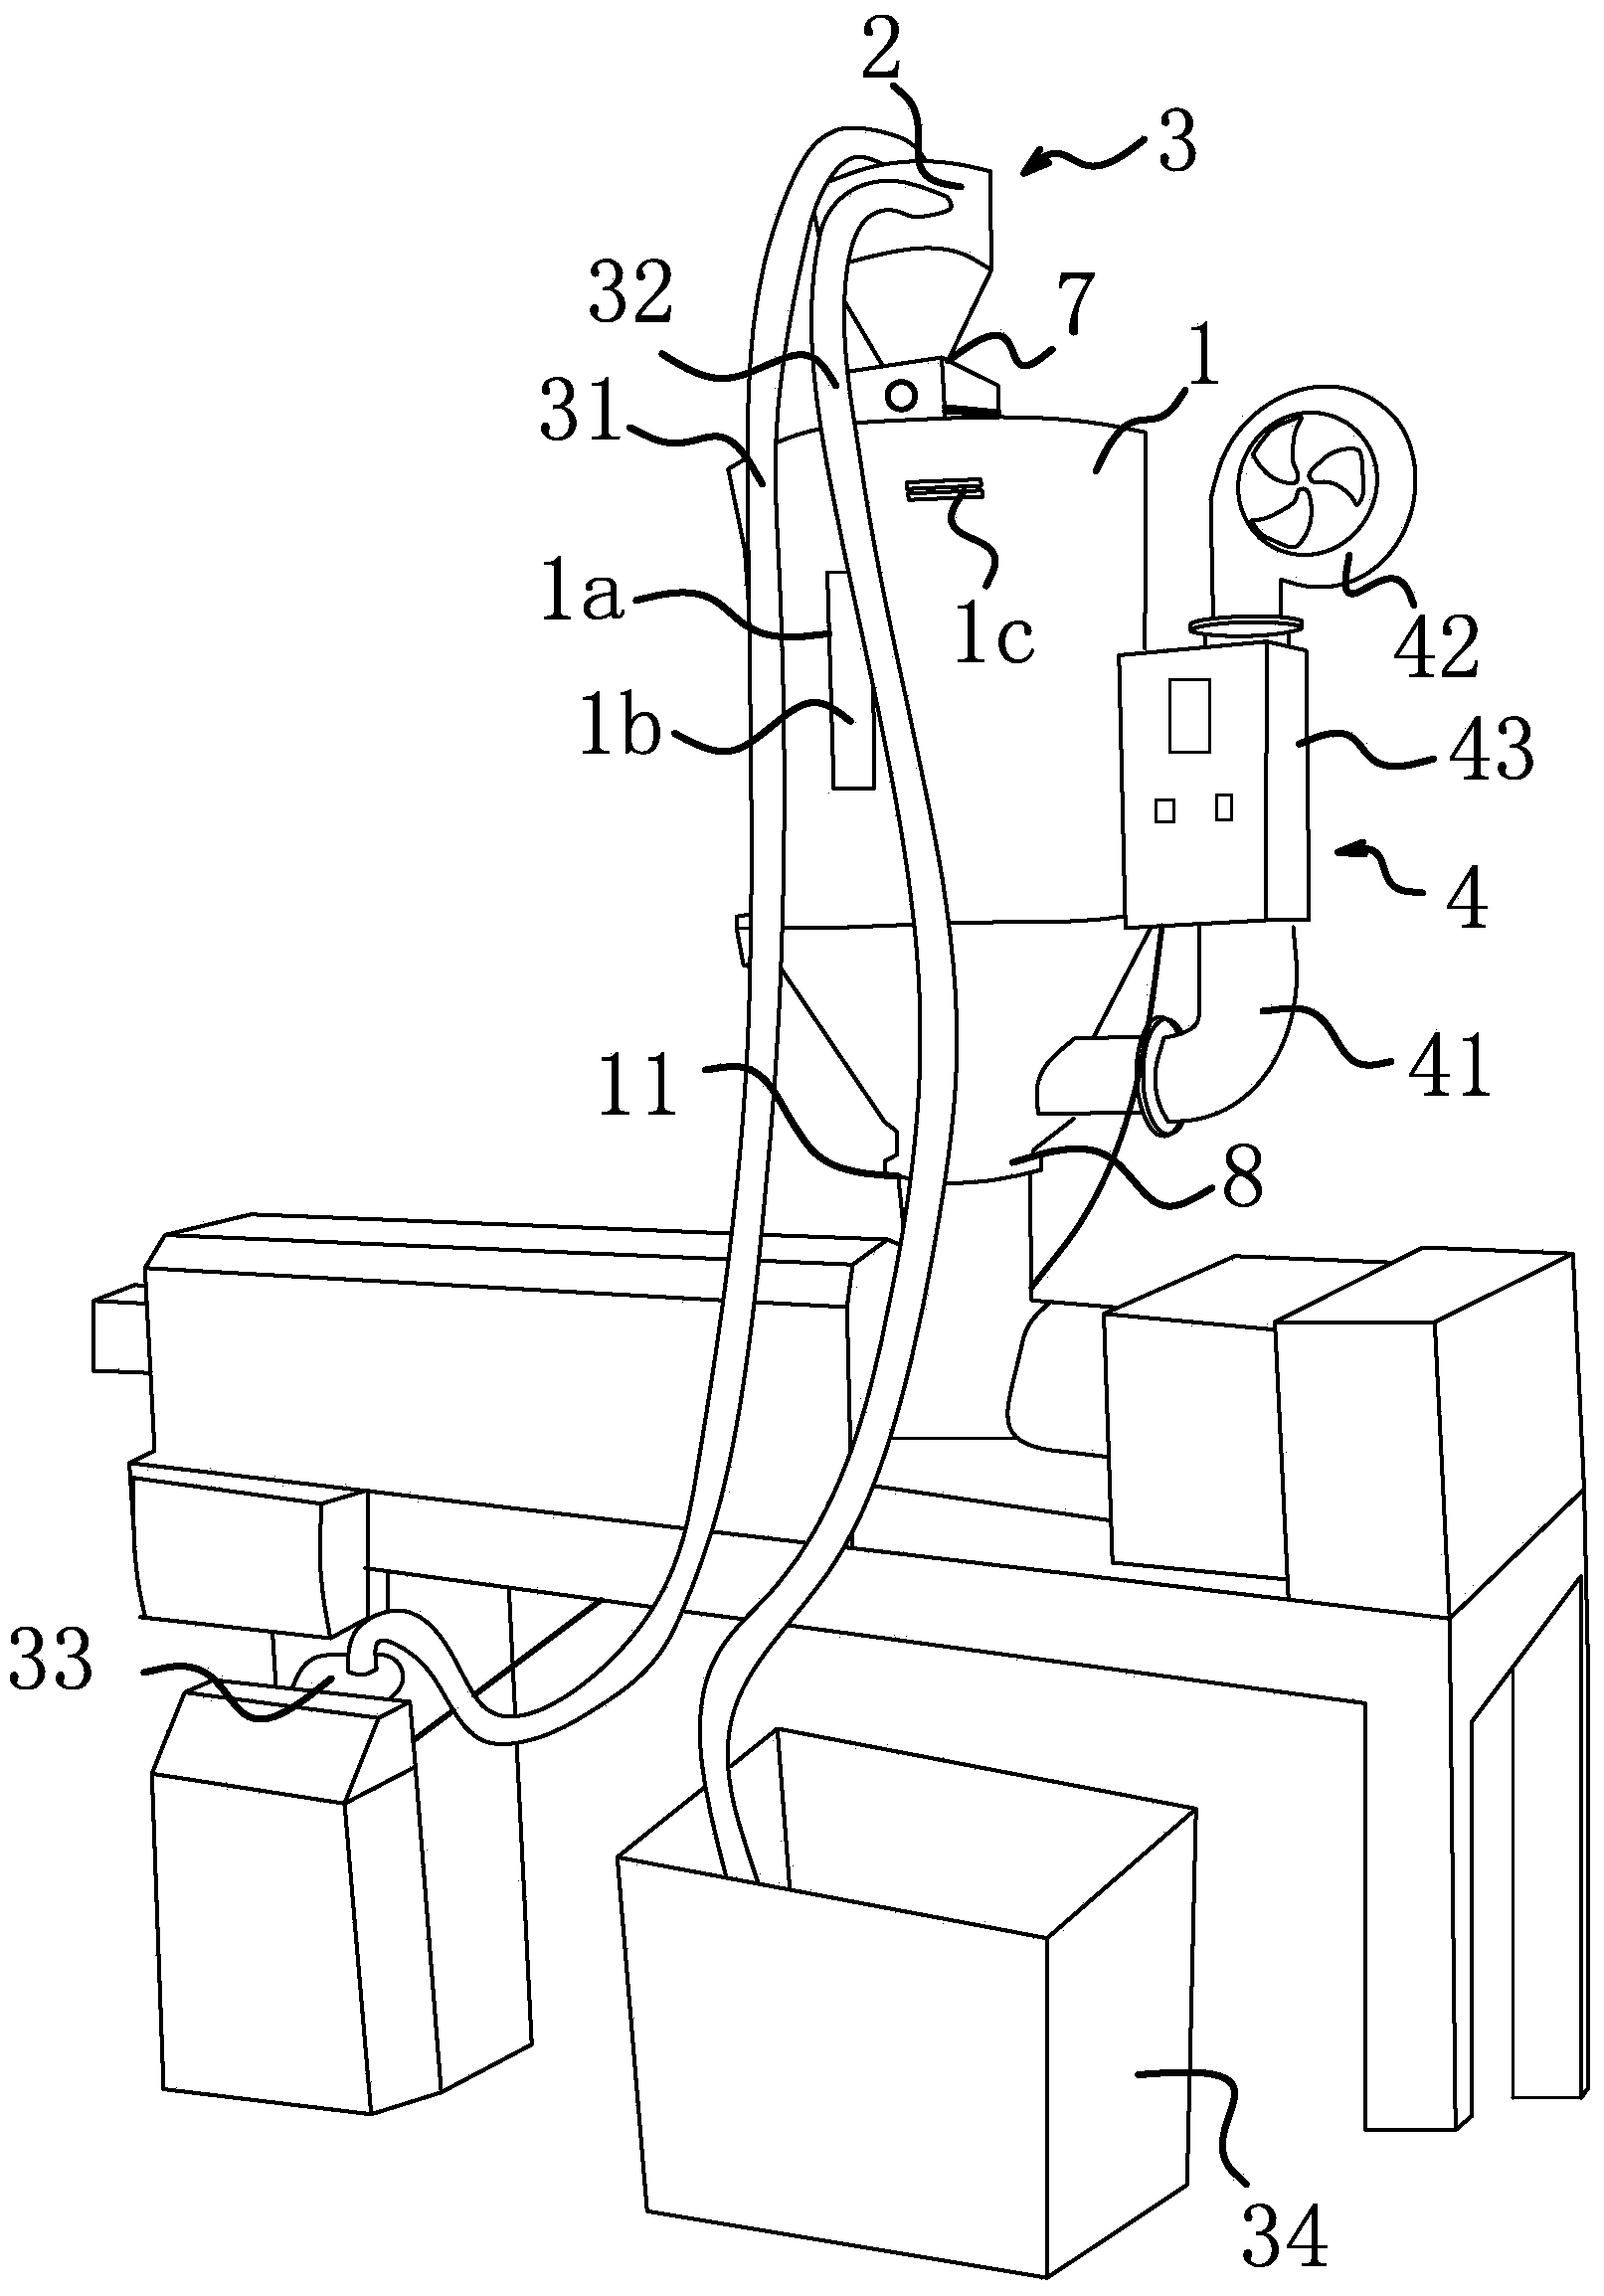 Plastic particle feeding device of cable processing device